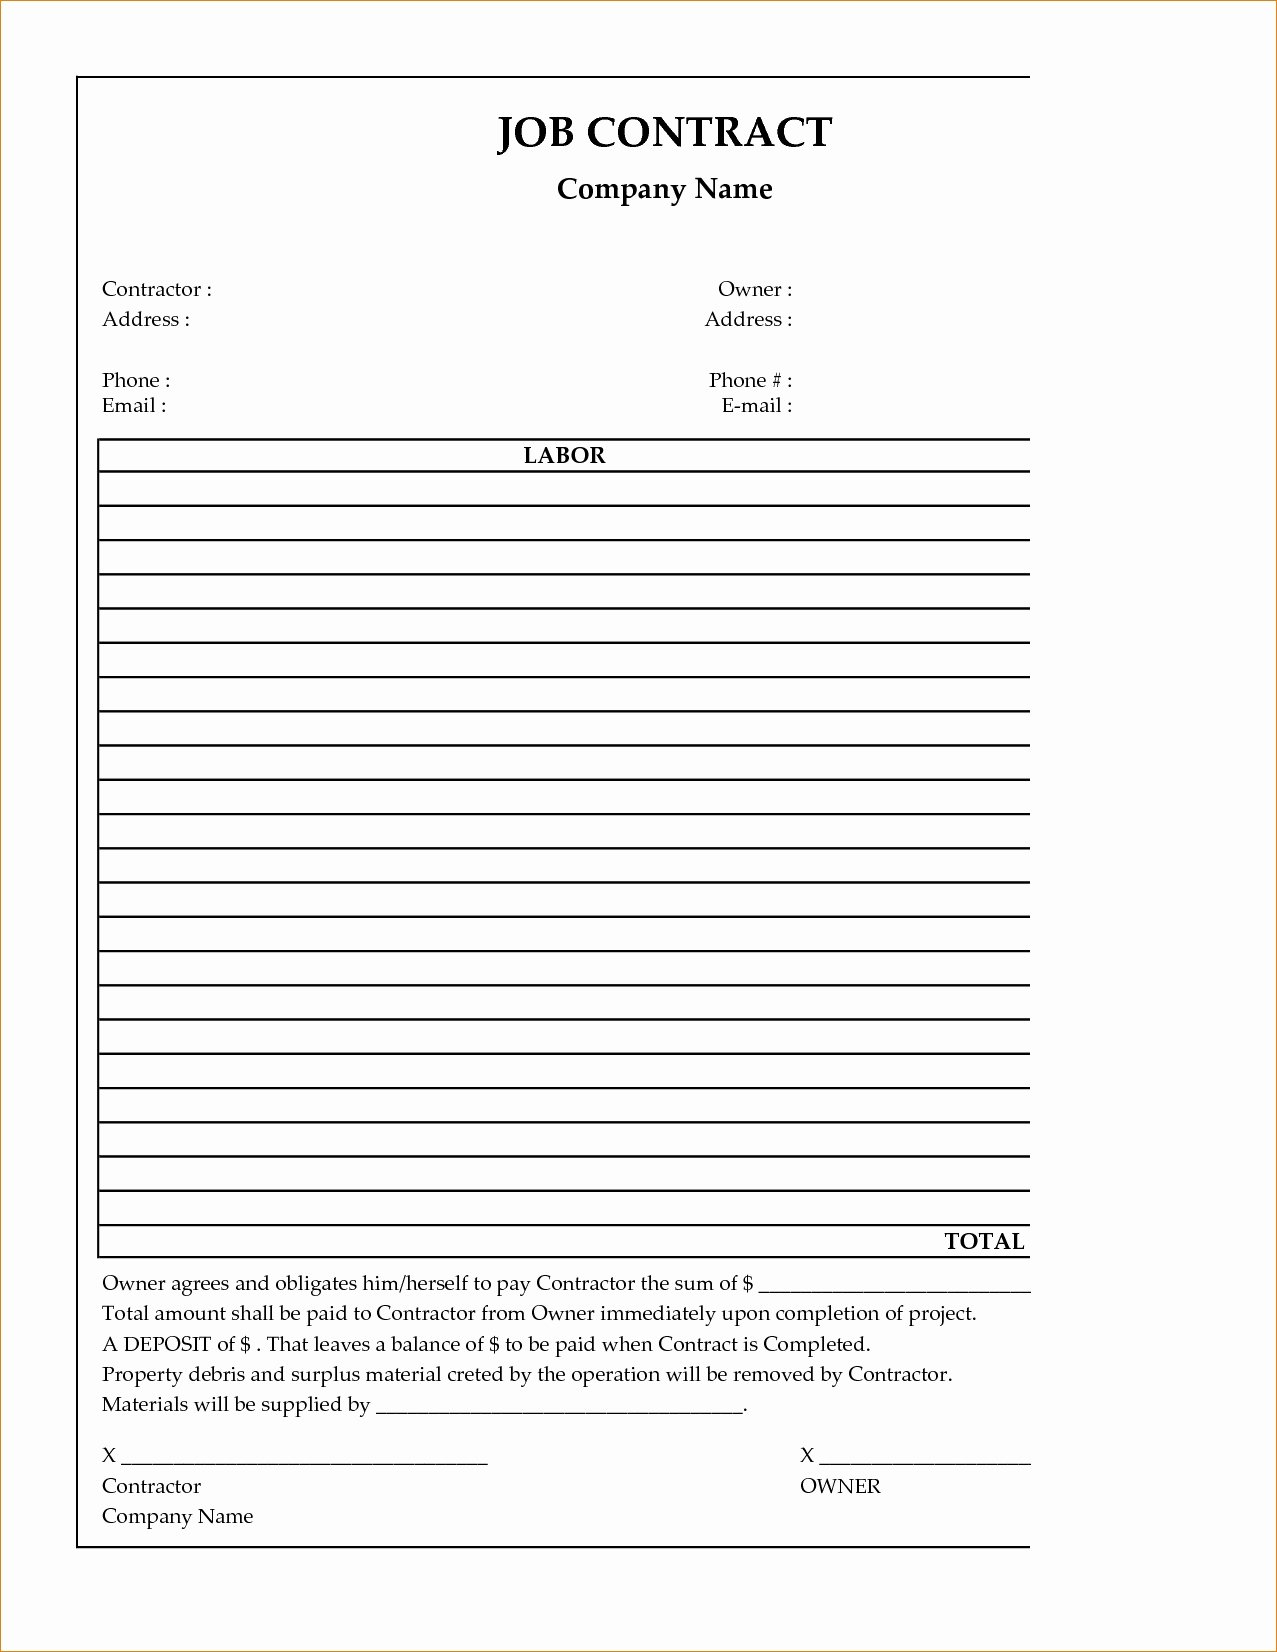 Free Roofing Contract Template Elegant Construction Contract Agreement Great 8 Free Construction